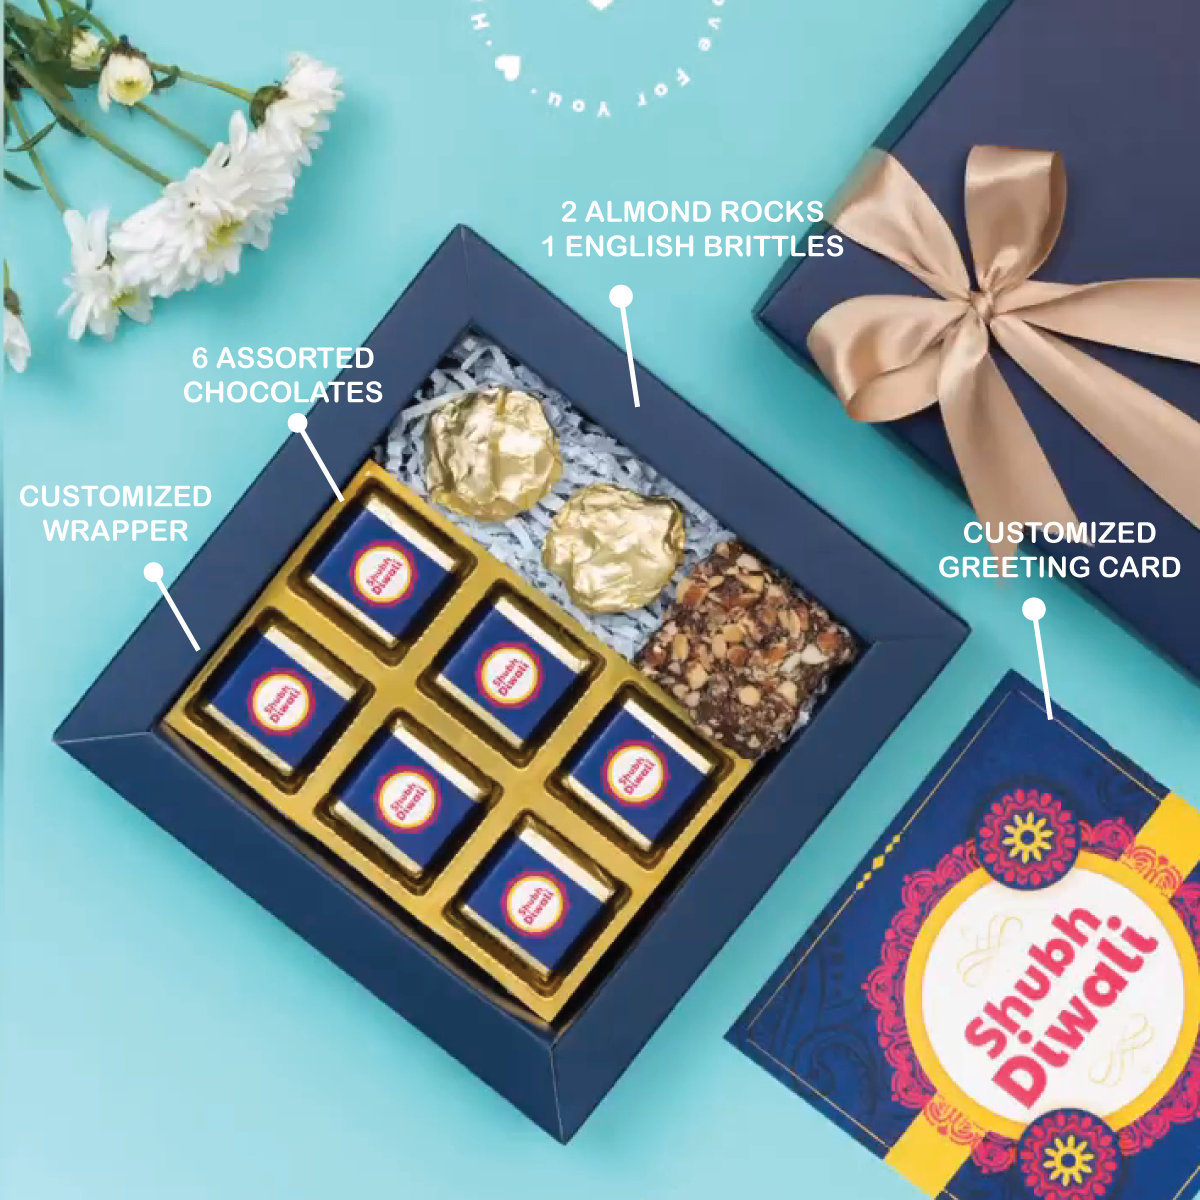 Customized Chocolate Wrapper with Greeting Message Chocolates, English Brittle, and Almond Rocks Combo Gift Set - For Employees, Dealers, Customers, Stakeholders, Personal or Corporate Diwali Gifting CV24